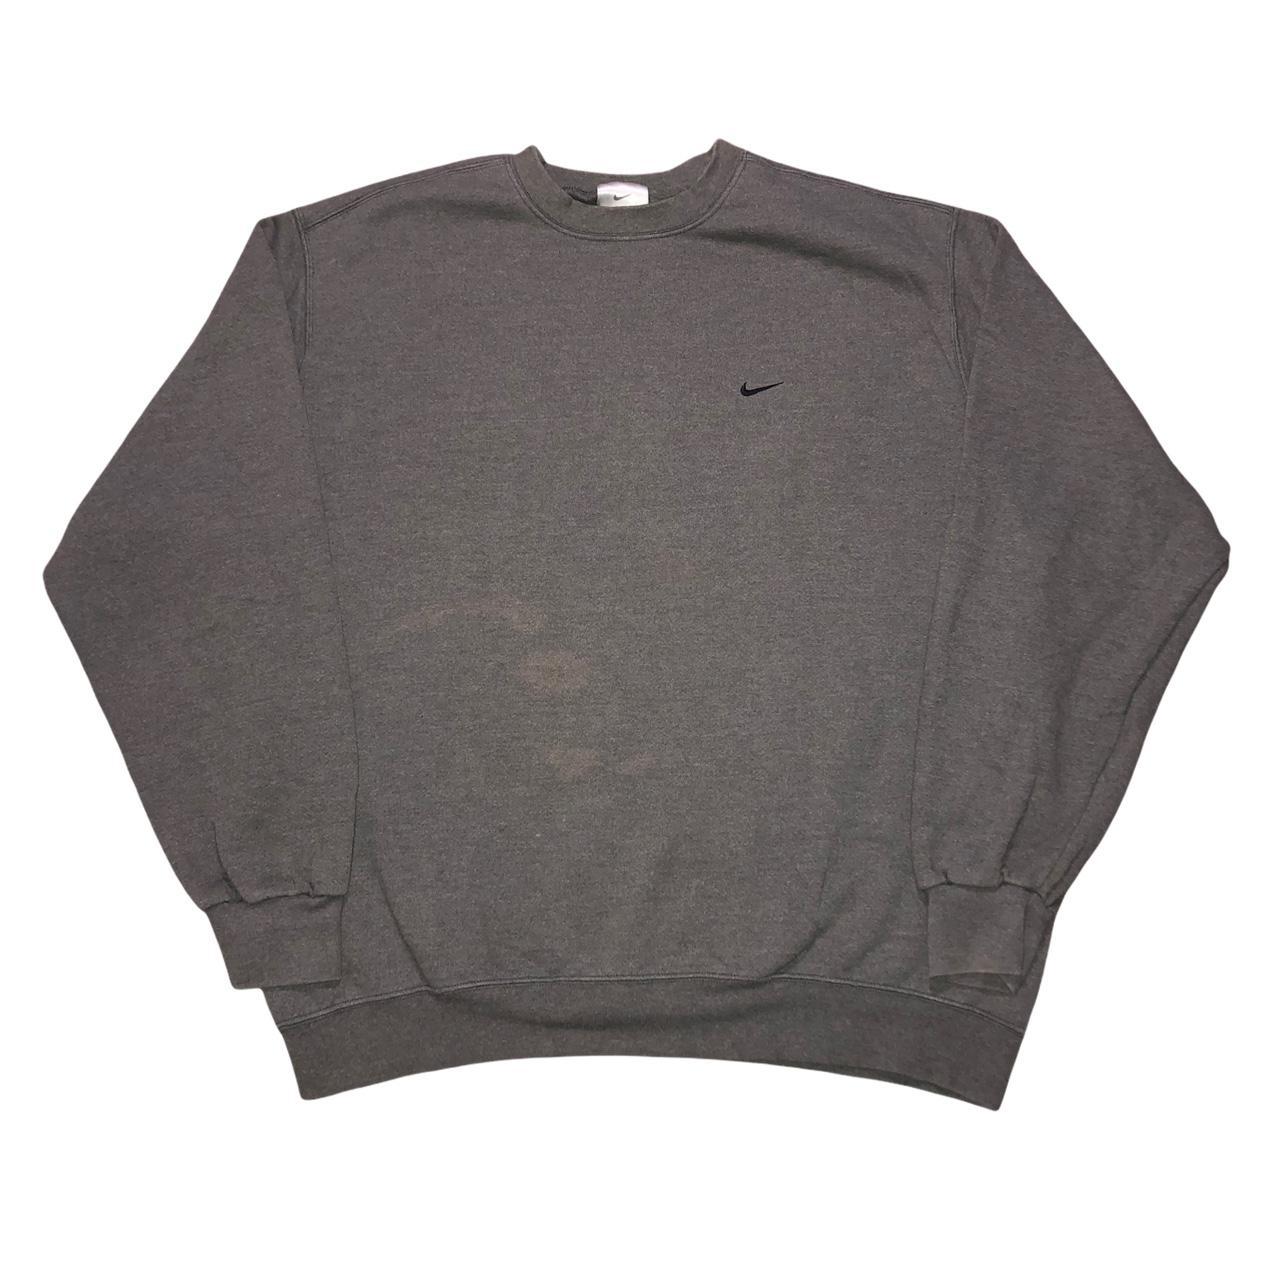 Product Image 1 - Nike Embroidered Logo Crewneck
Dated: 2000s

-embroidered